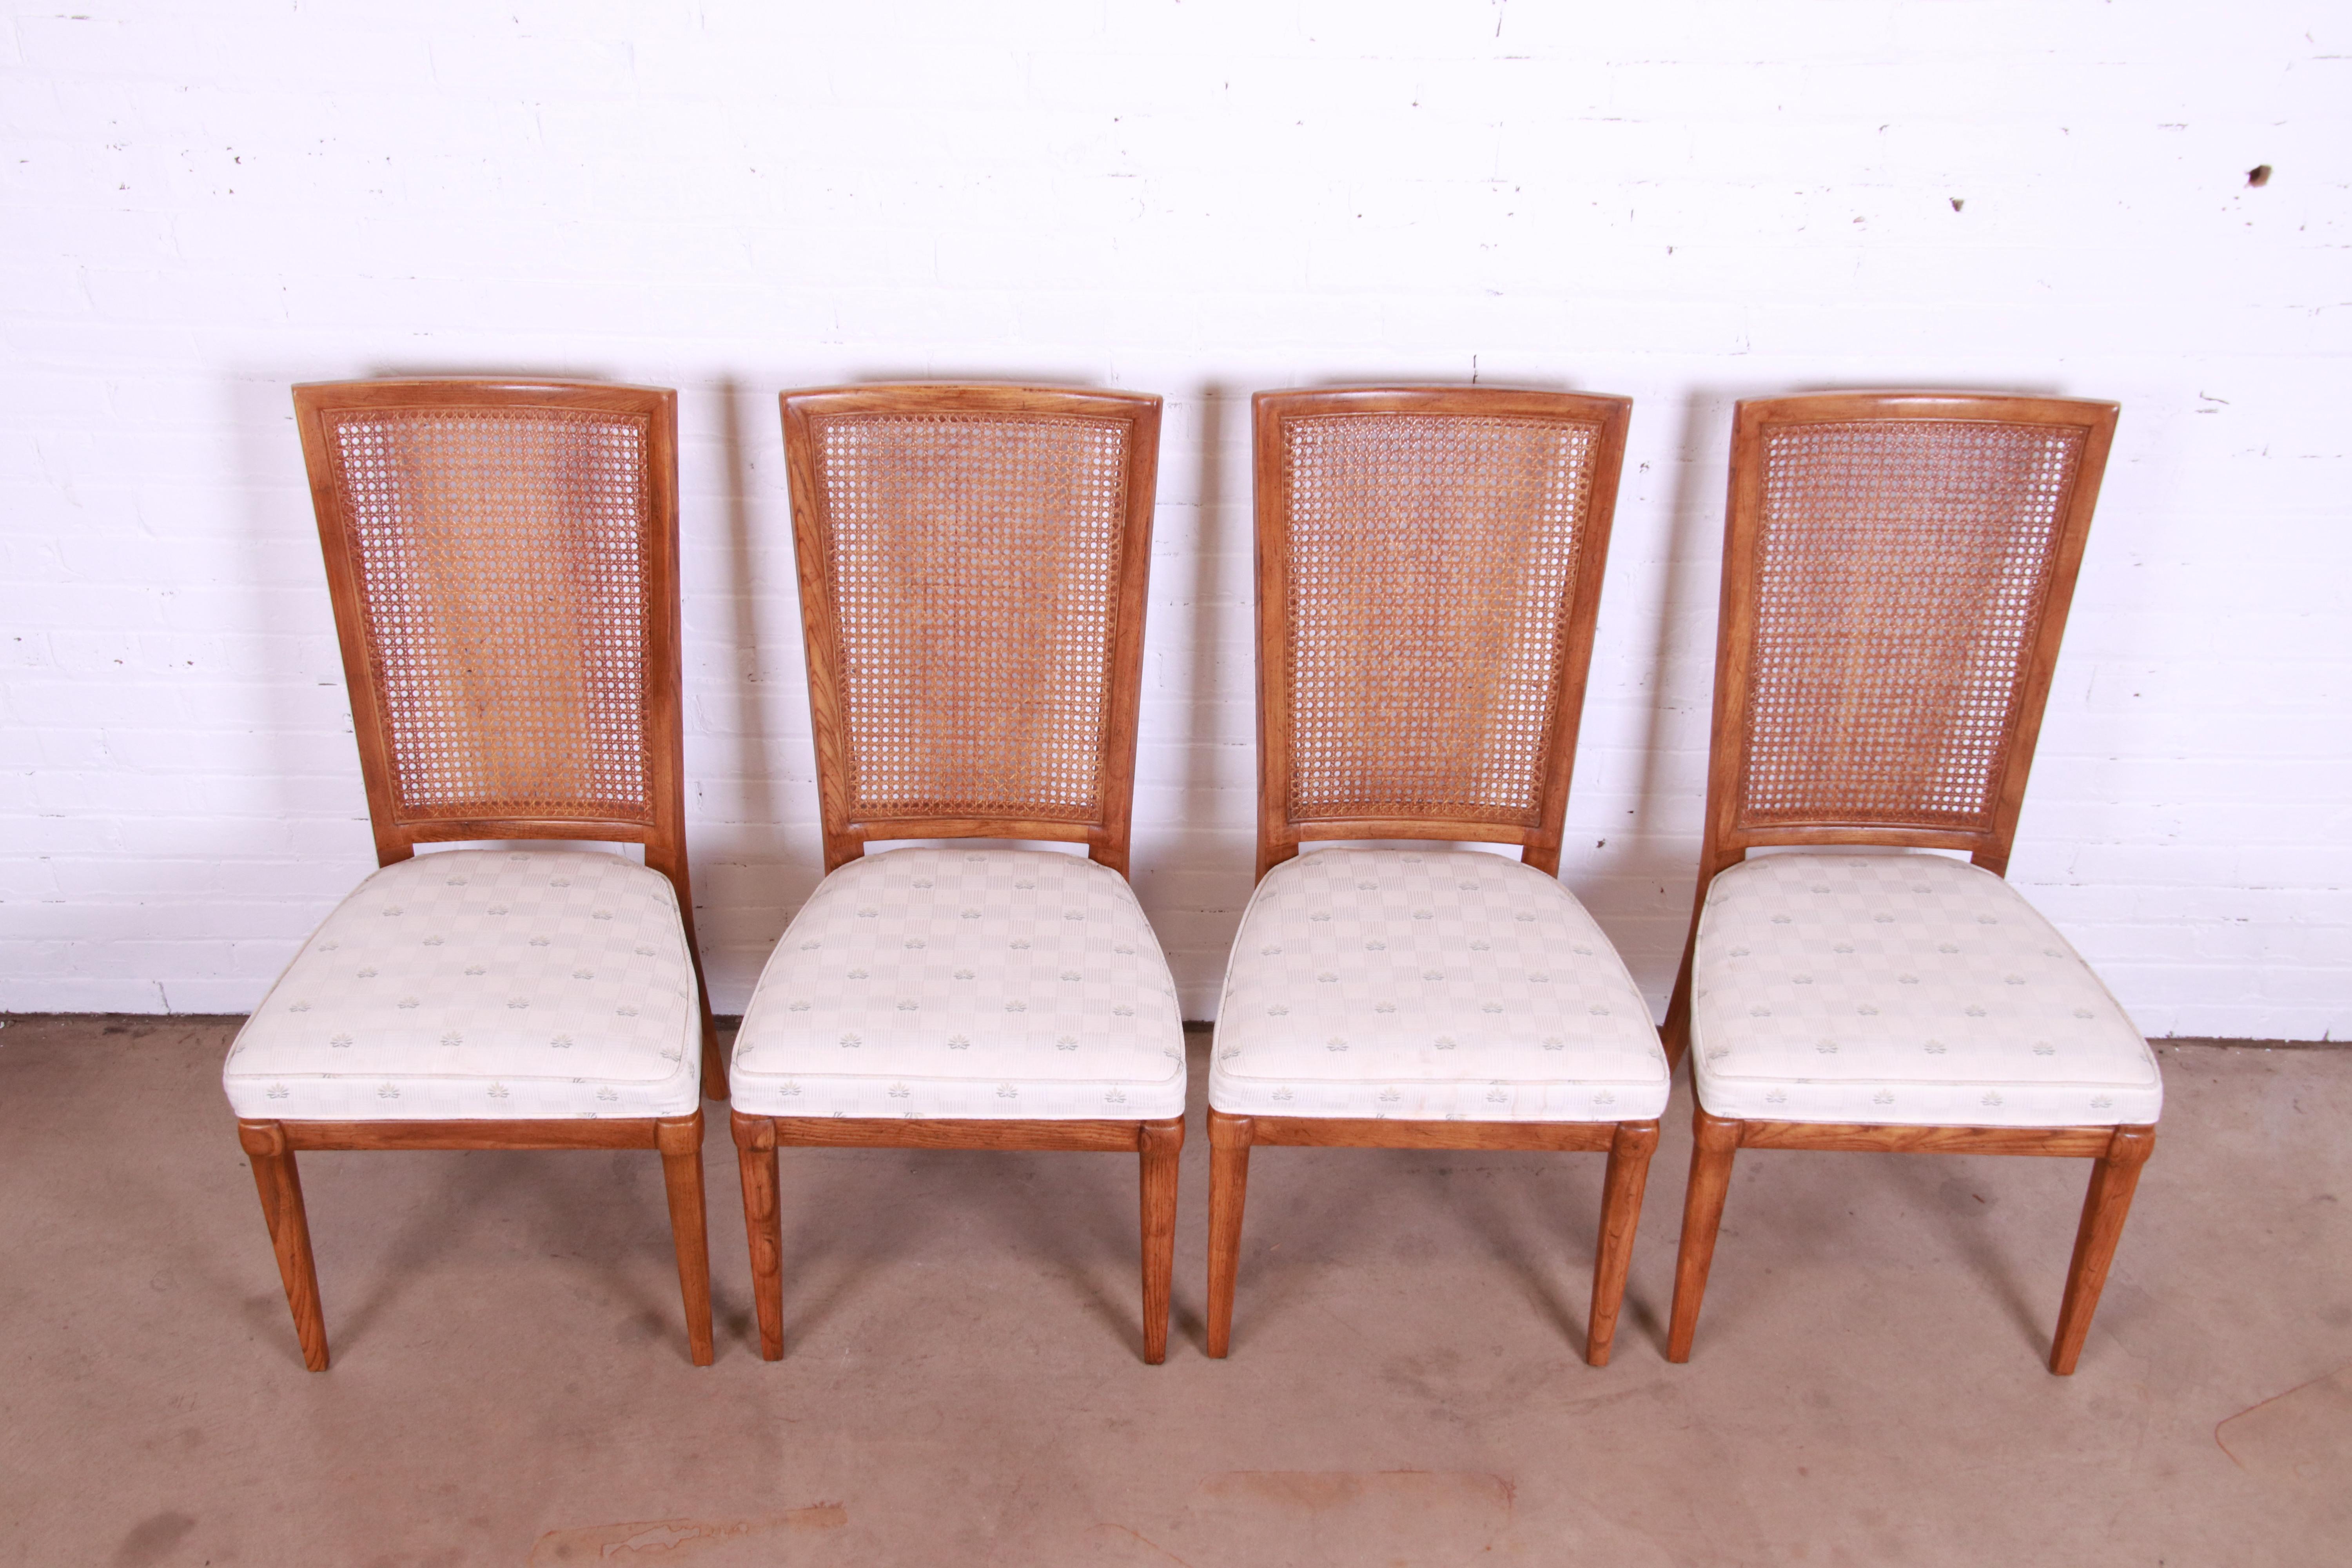 Henredon Mid-Century Modern Oak and Cane Dining Chairs, Set of Four 1